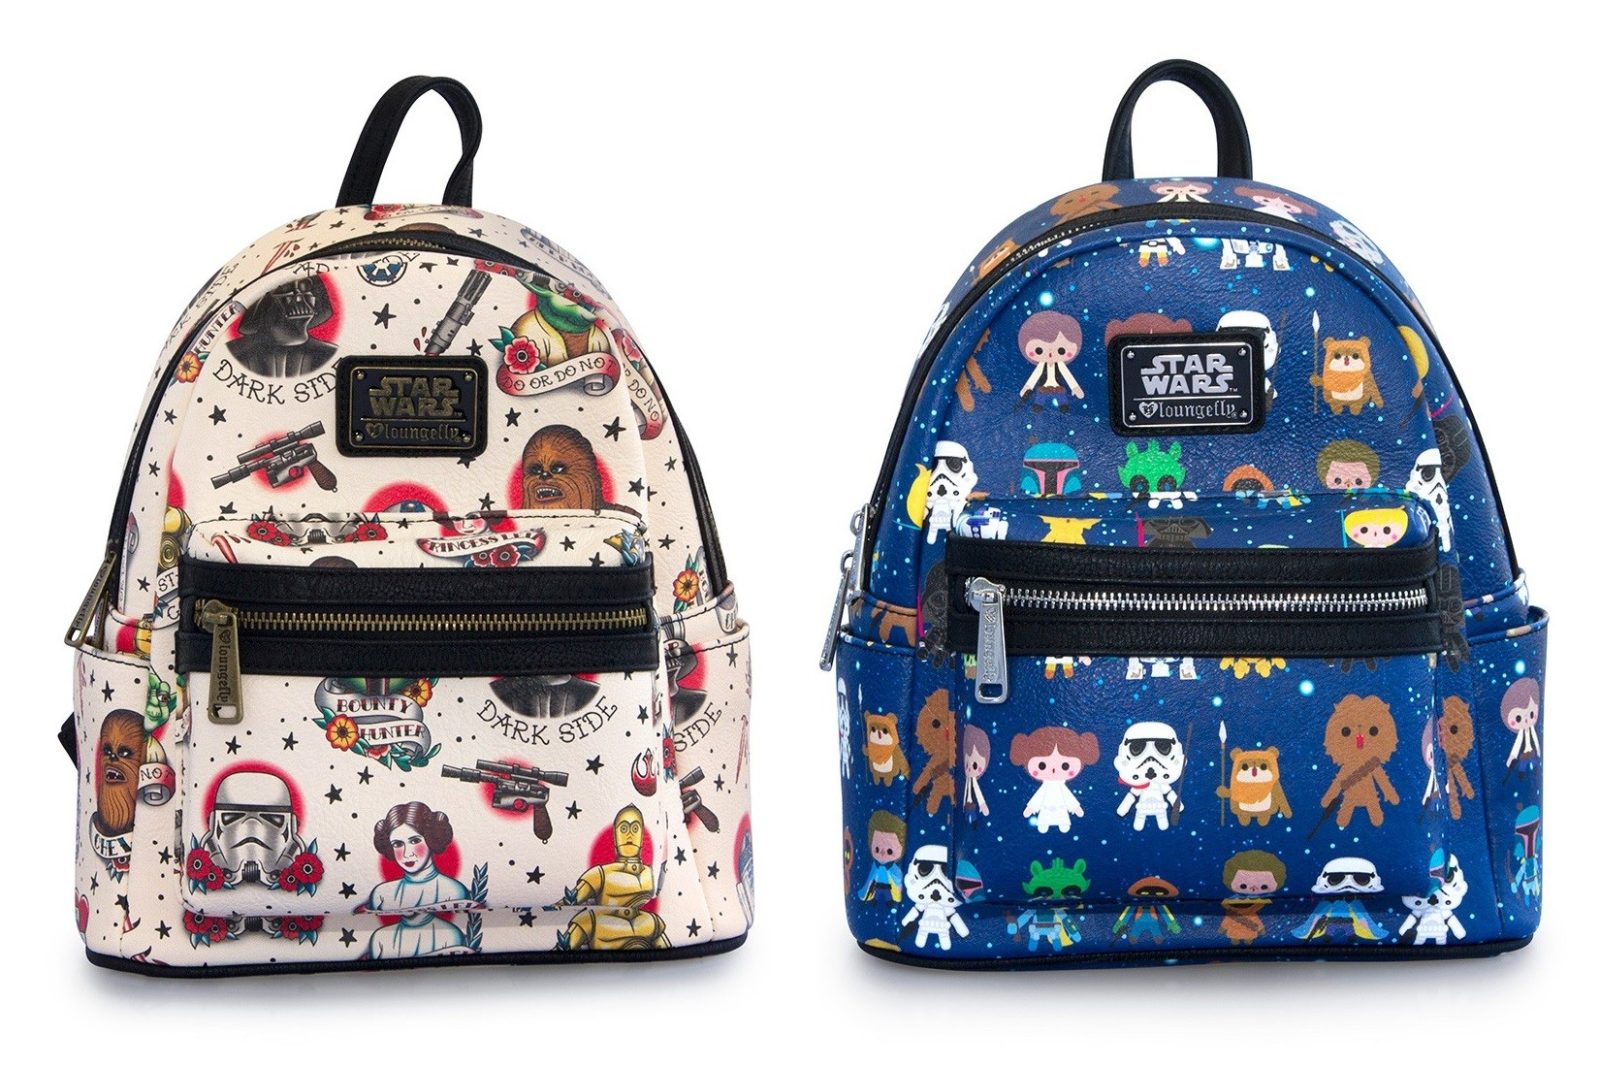 New Star Wars backpacks at Loungefly The Kessel Runway